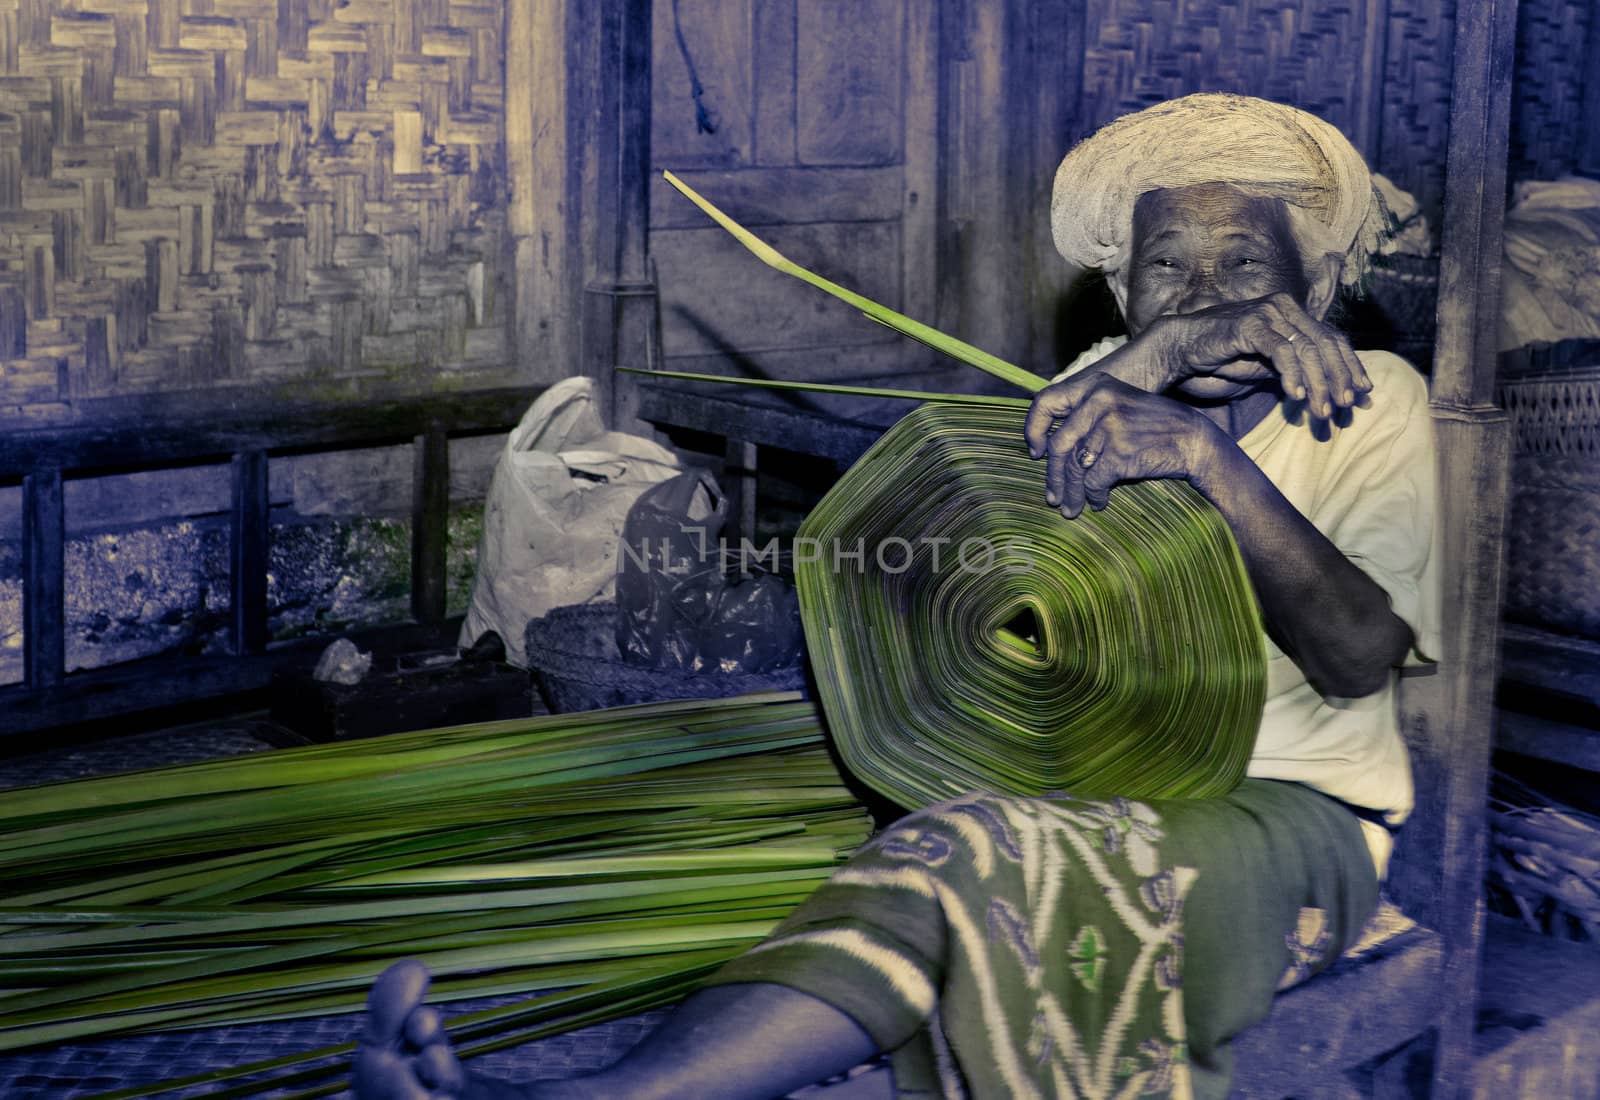 Smiling indigenous old woman sitting on a wooden bench outdoors using natural plant fibres while weaving a basket or mat in Bali